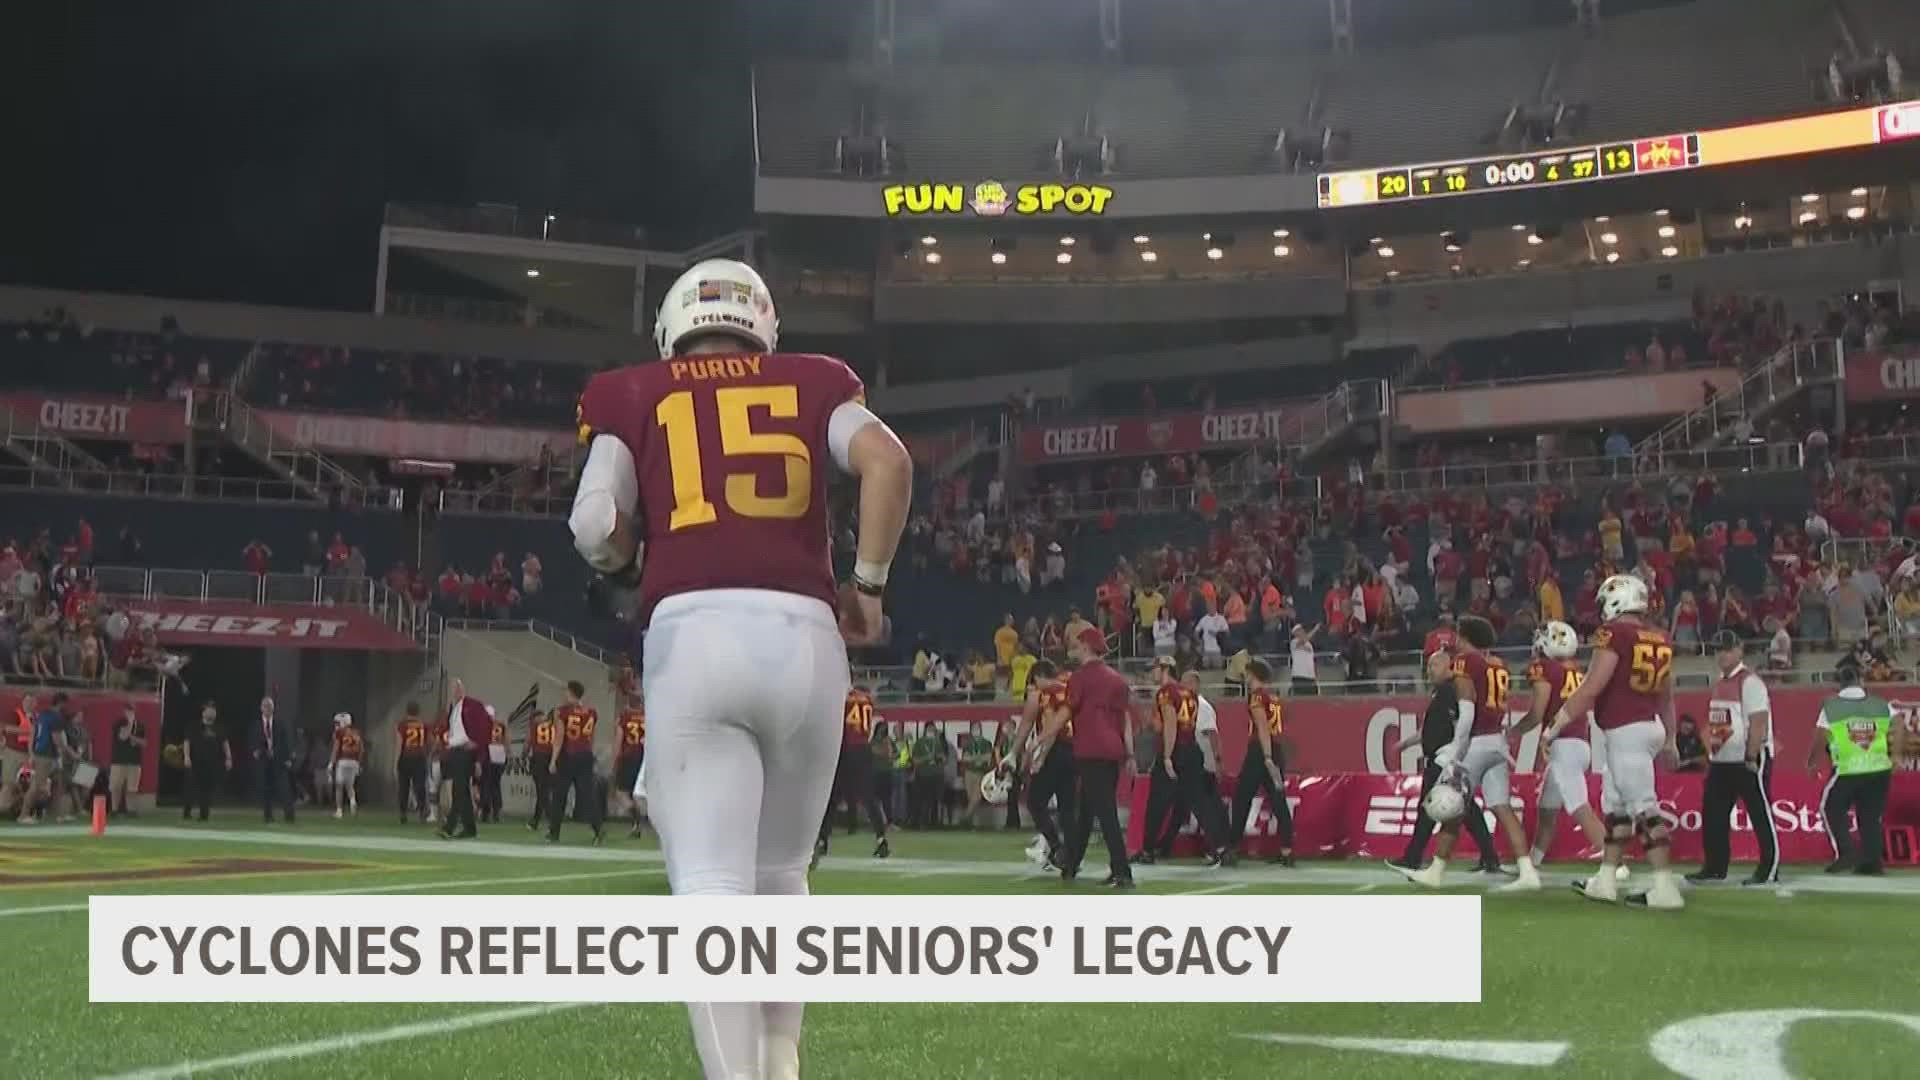 The Iowa State Cyclones reflect on the last year, specifically this year's senior class.